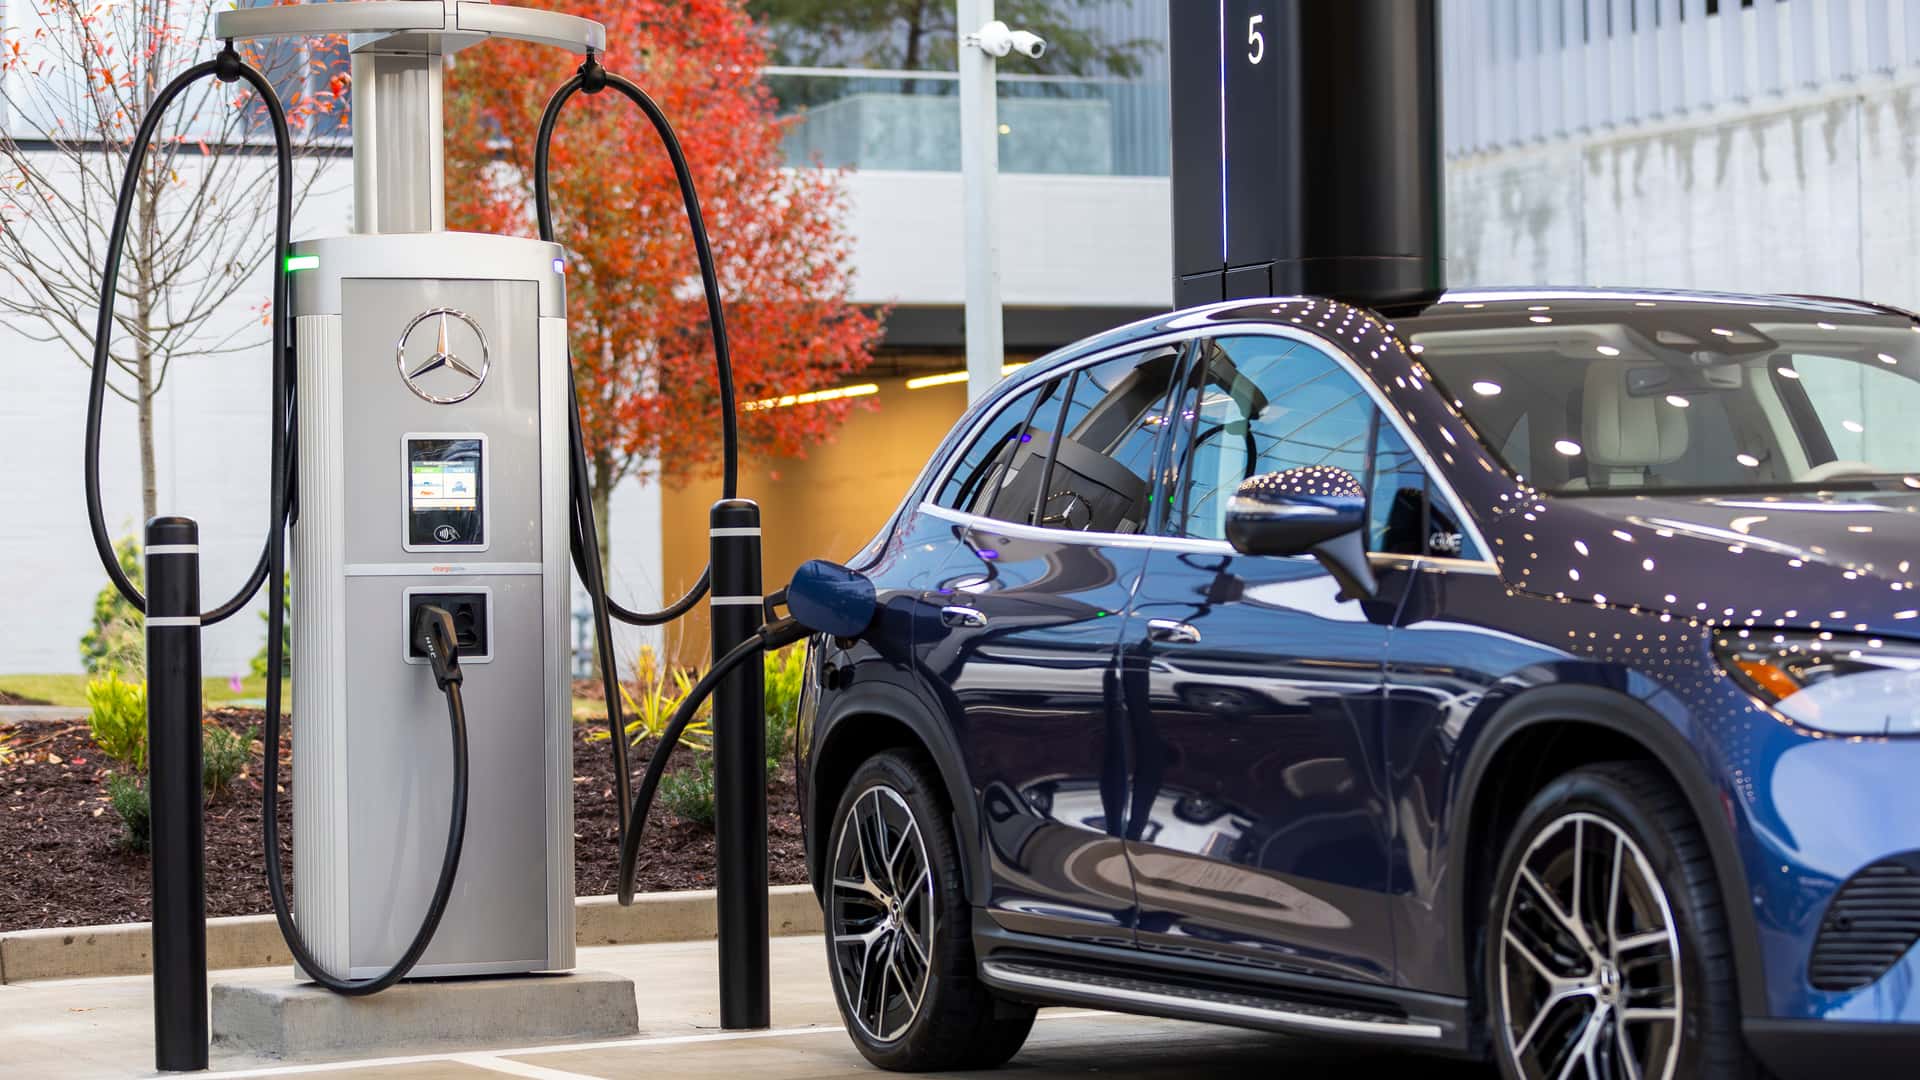 mercedes-benz wants to build north america's fastest ev charging network, starts with 400 kw